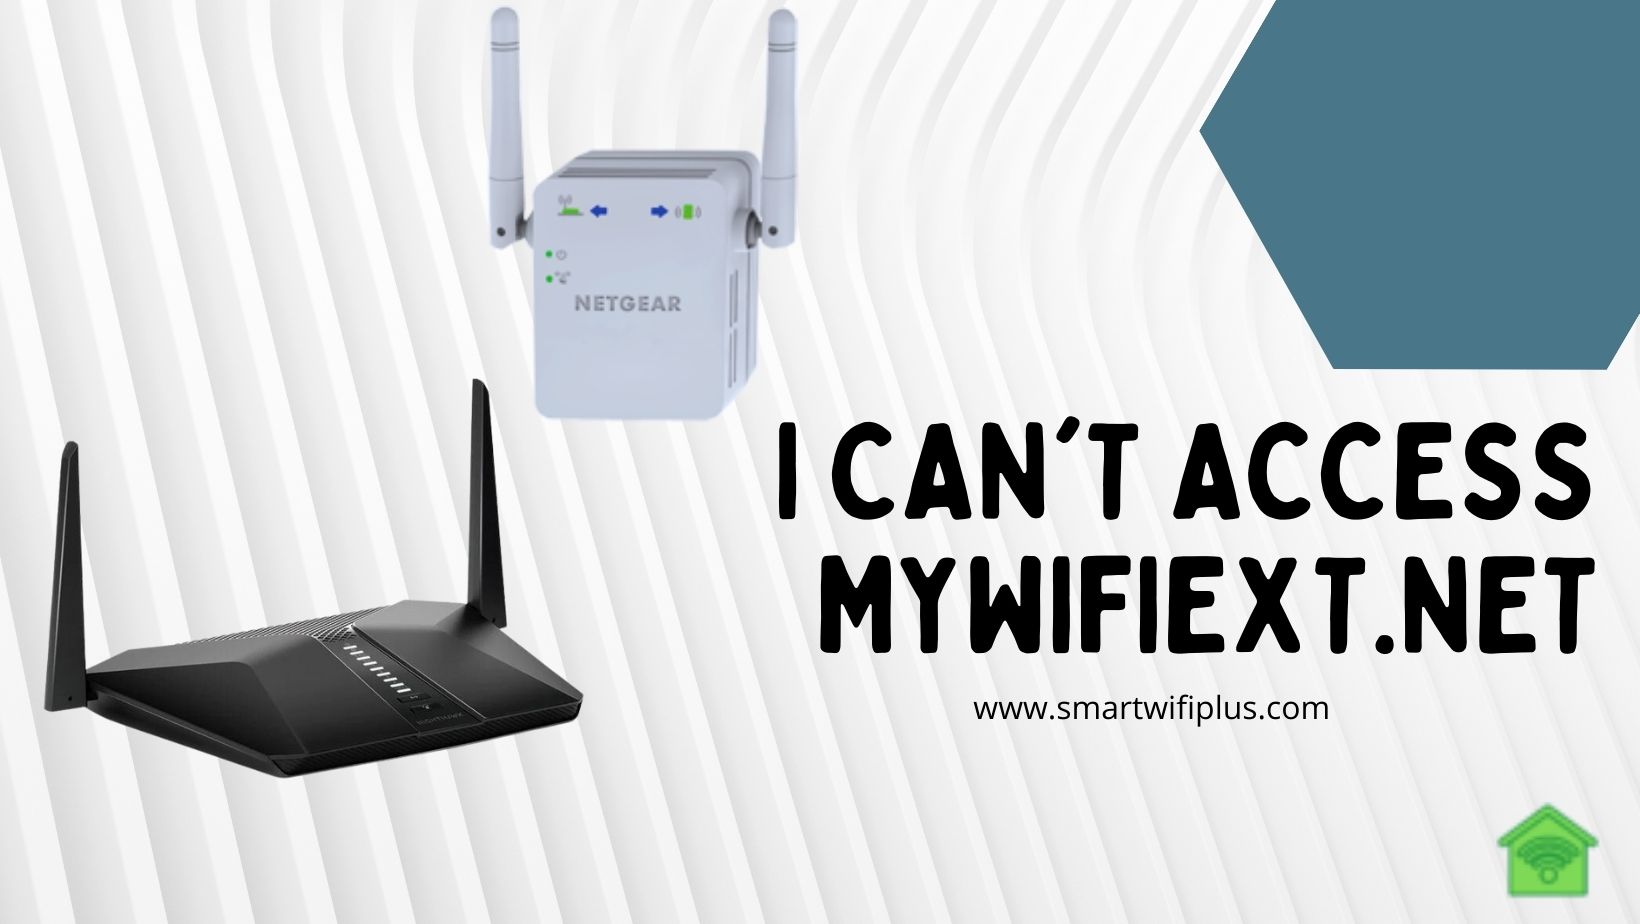 I can't access MyWifiext.net